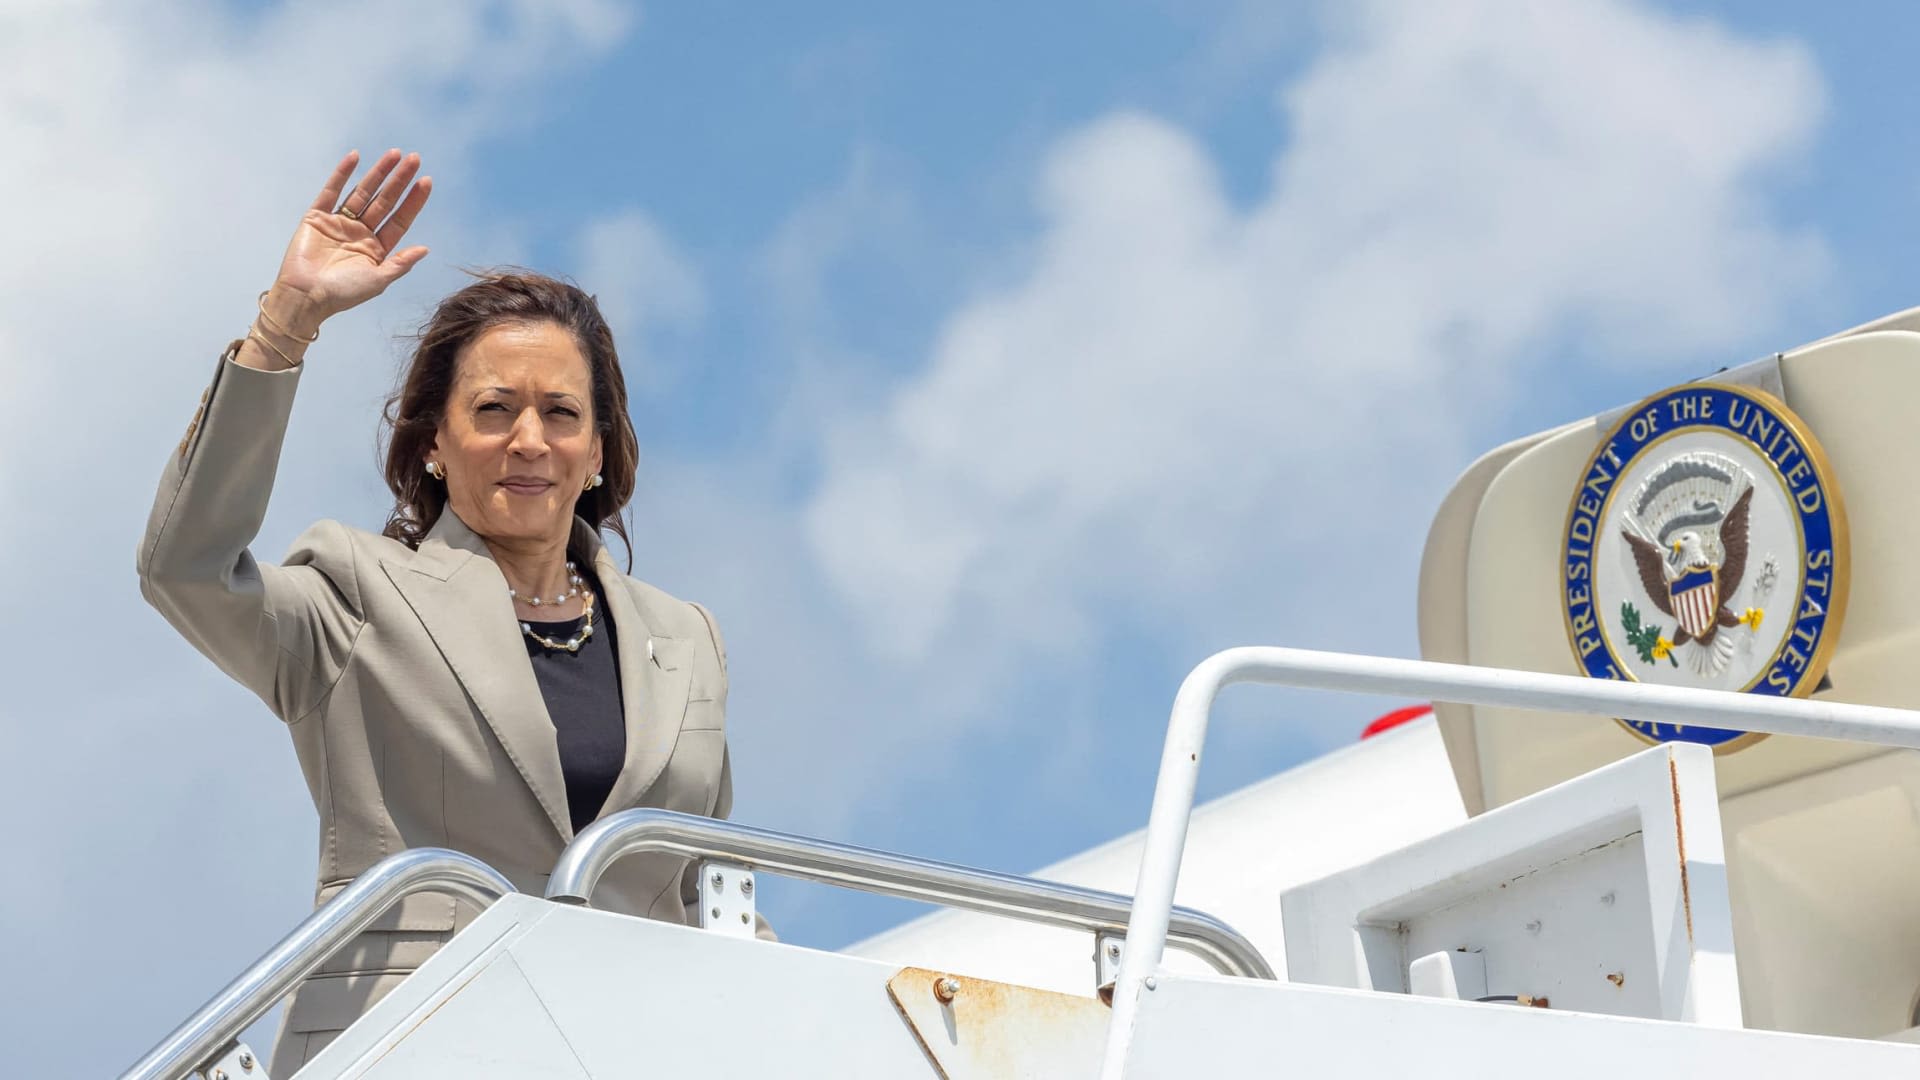 VP Kamala Harris and Democratic donors discuss 'urgent, emerging needs' in the race, with Biden campaign in crisis